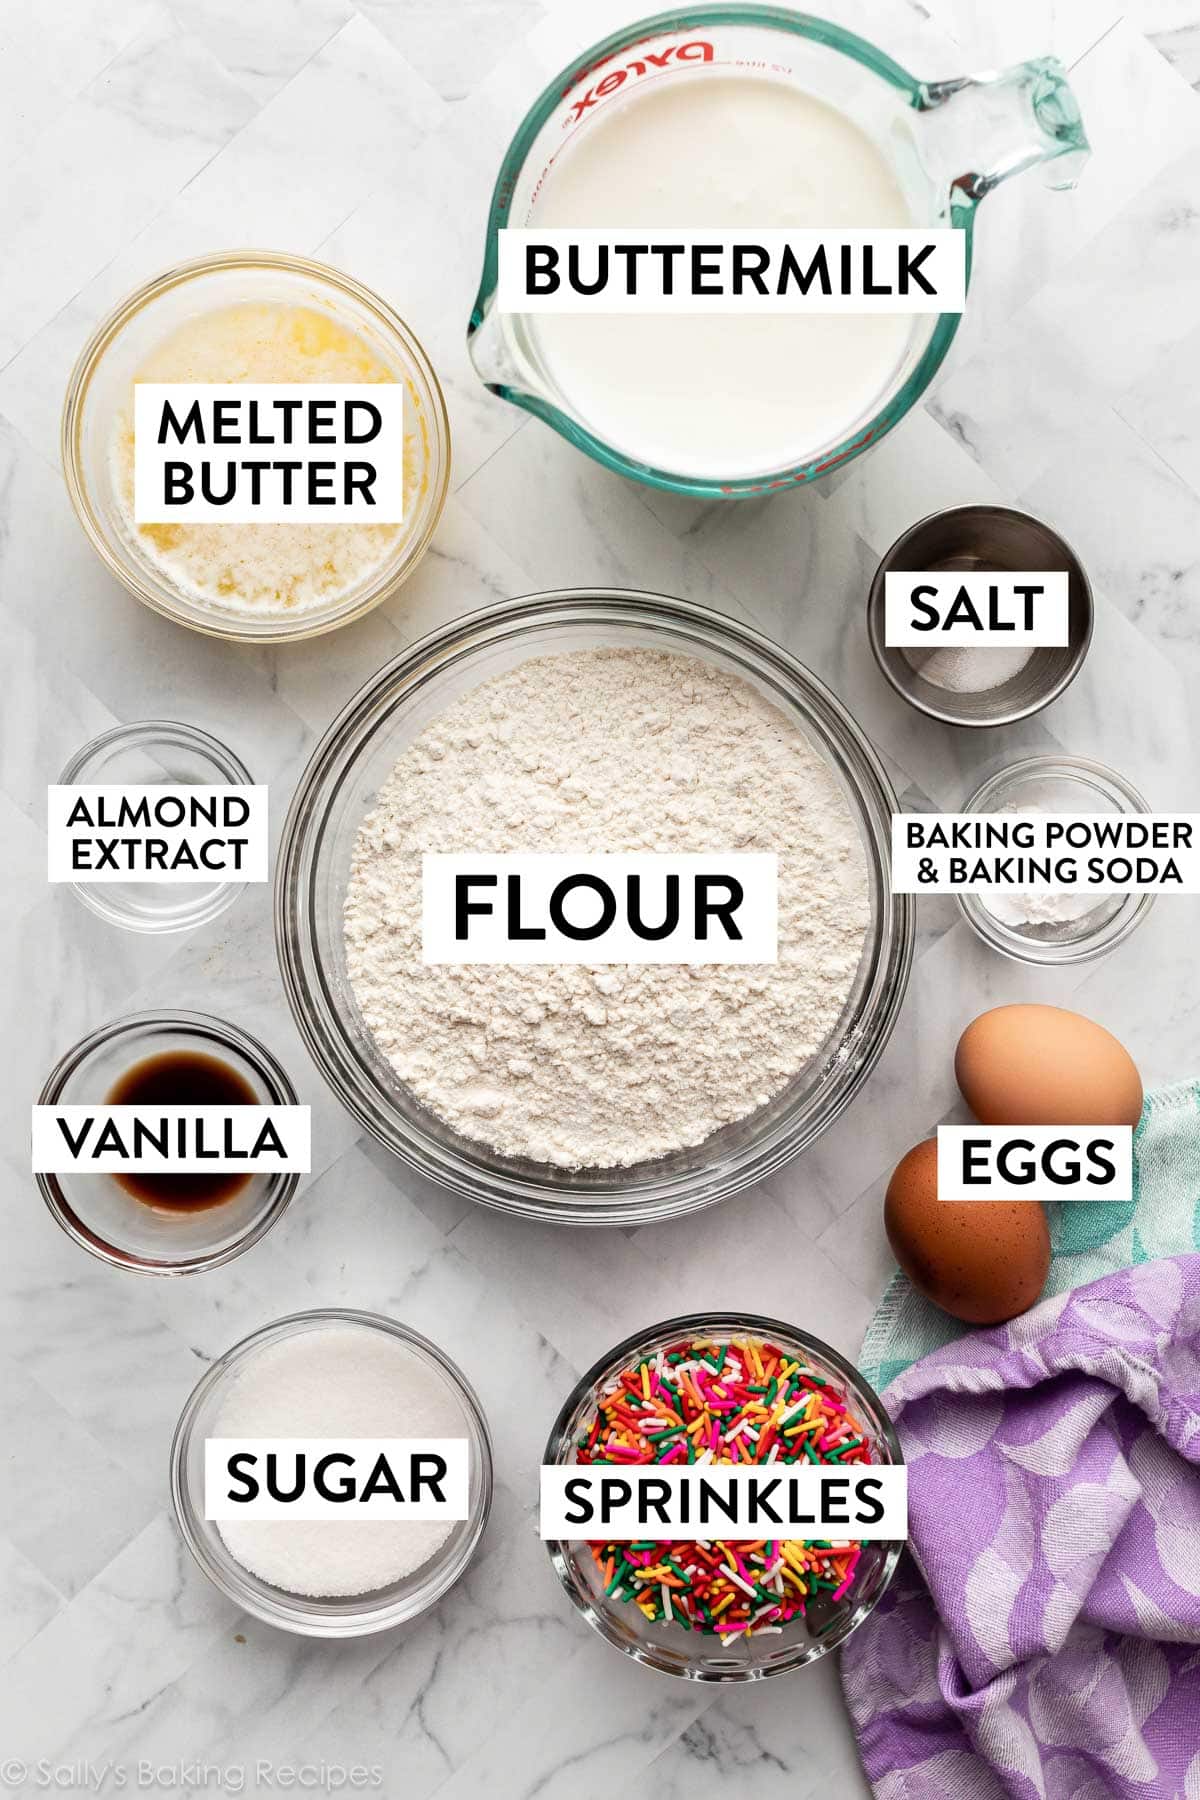 ingredients in bowls on marble counter including flour, sprinkles, salt, melted butter, vanilla, buttermilk, and sugar.